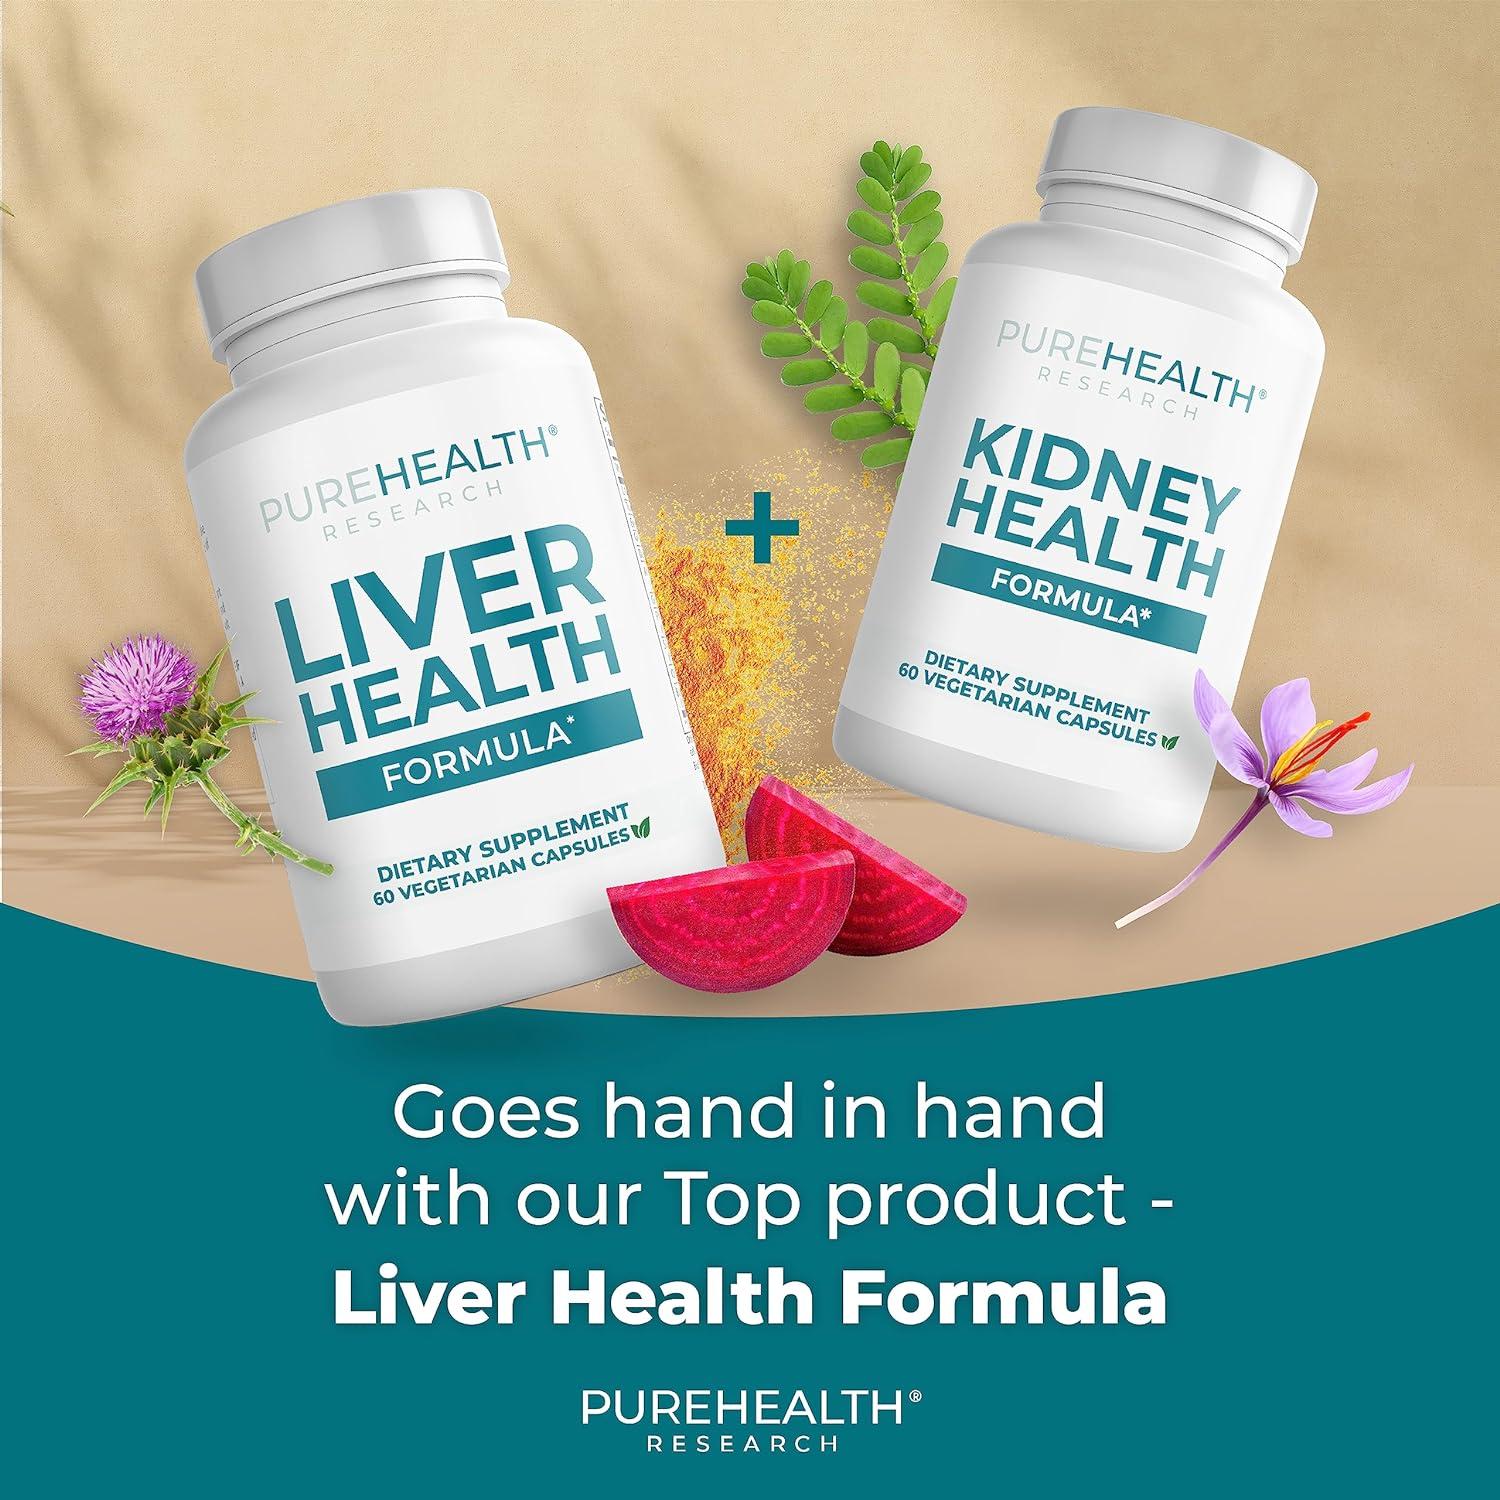 PUREHEALTH RESEARCH Kidney Health Formula - Complete Kidney